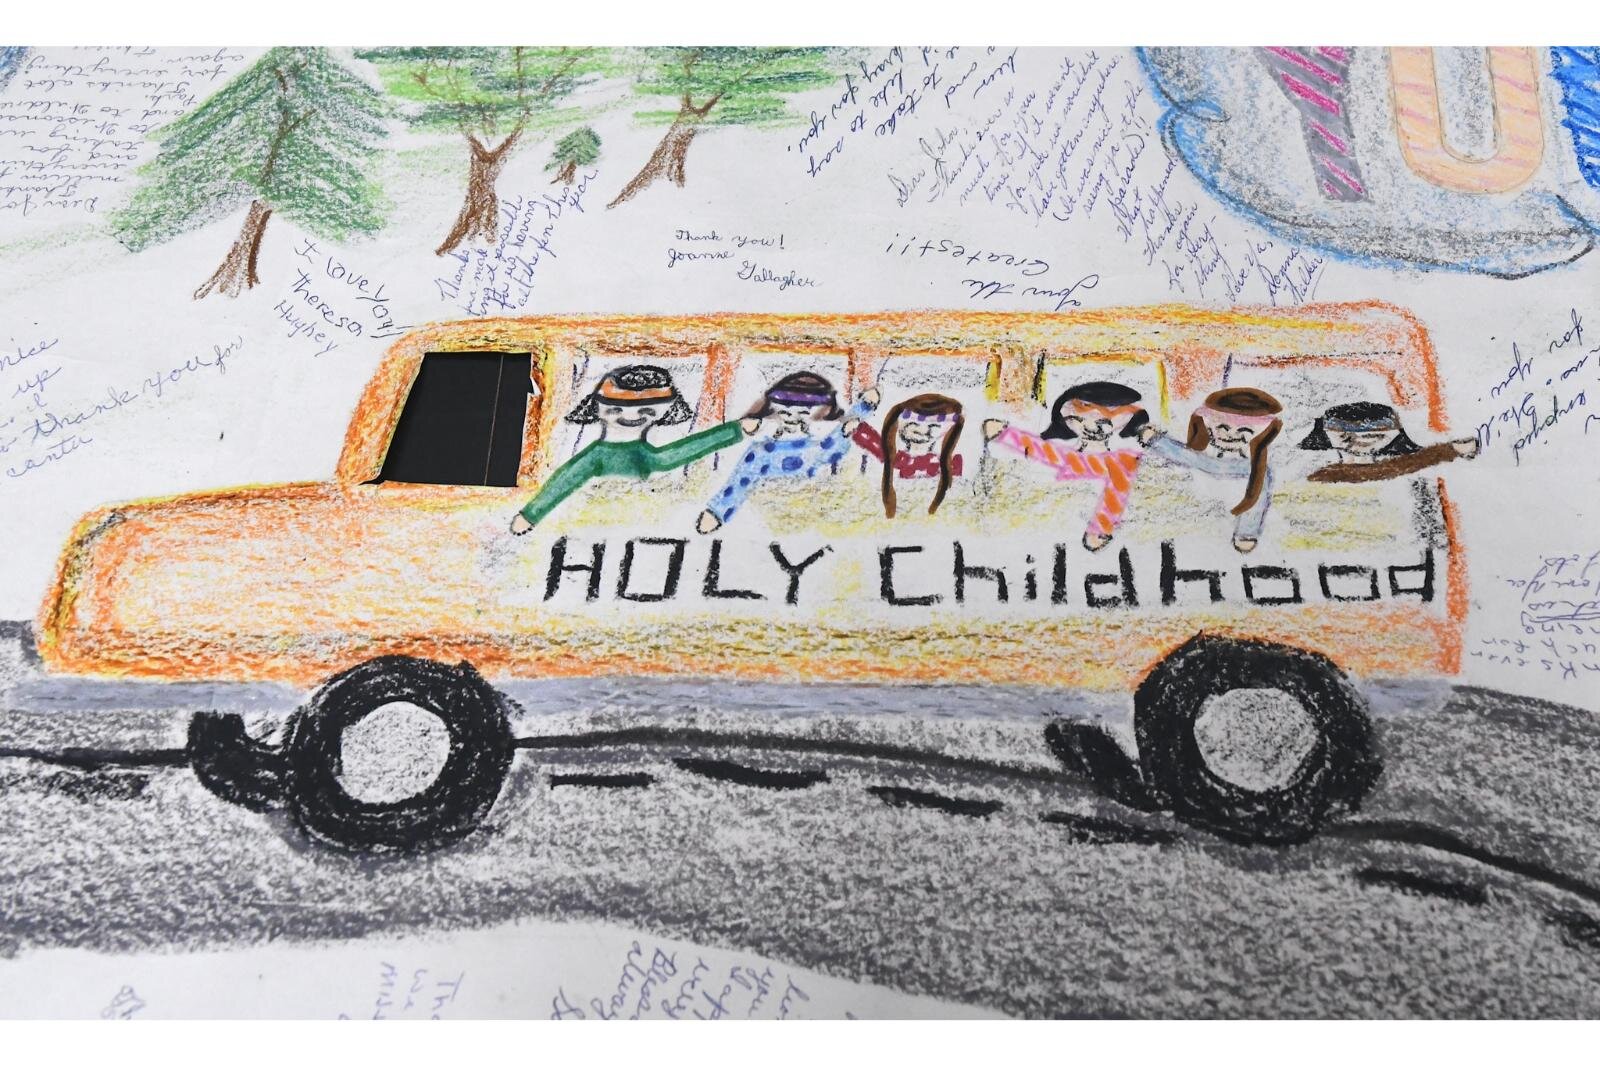 Scenes from a poster made by students at Holy Childhood School of Jesus in Harbor Springs.